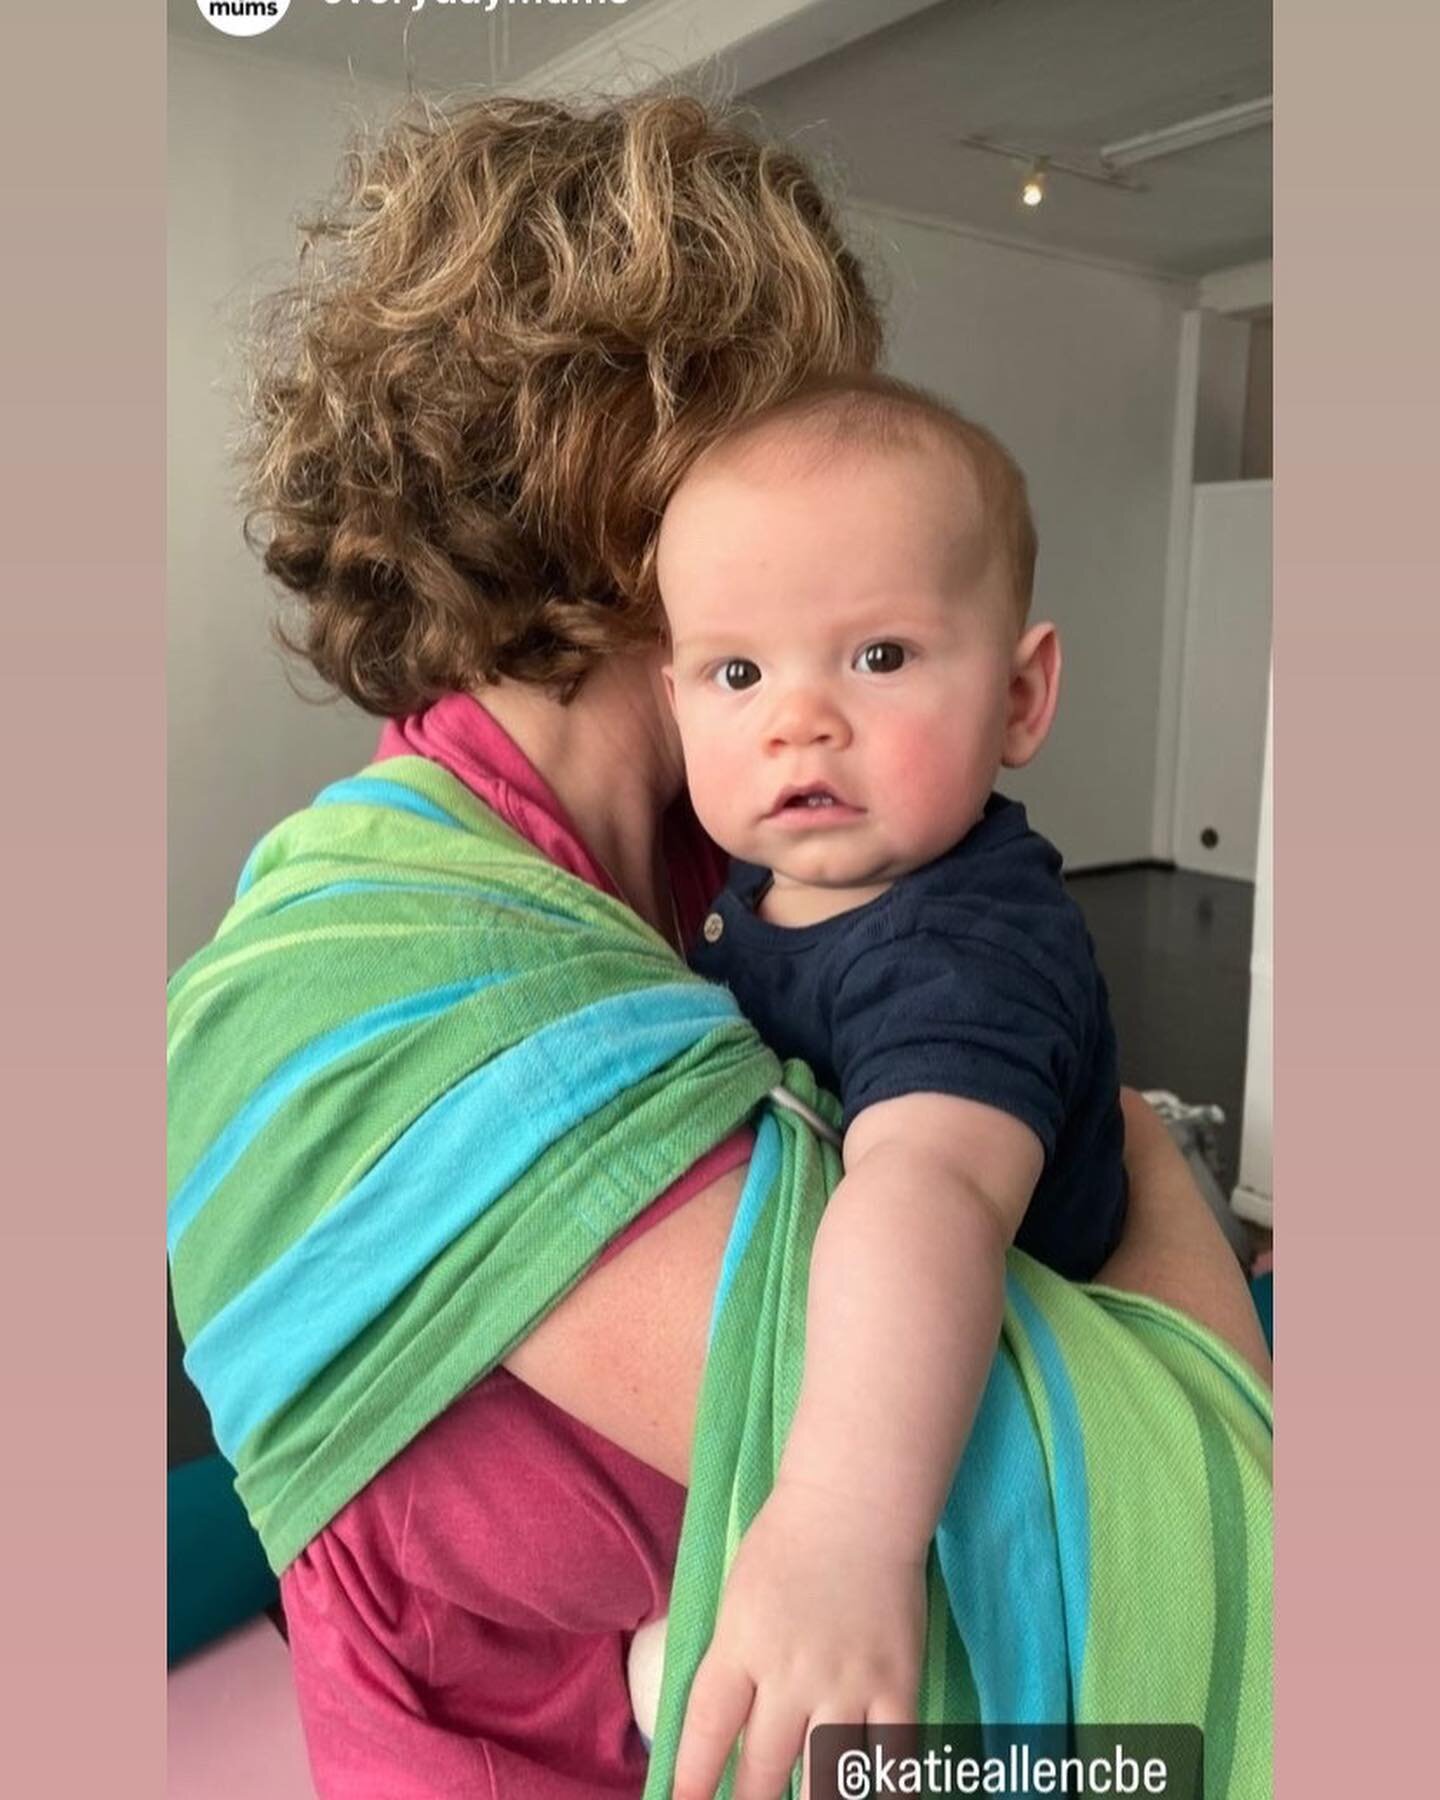 We all need that one friend who pushes us to step outside of our boundaries and comfort zone because they believe in you. Today this person for me was Talia from @everydaymums.

She knew last year that I had completed my training to be a Babywearing 